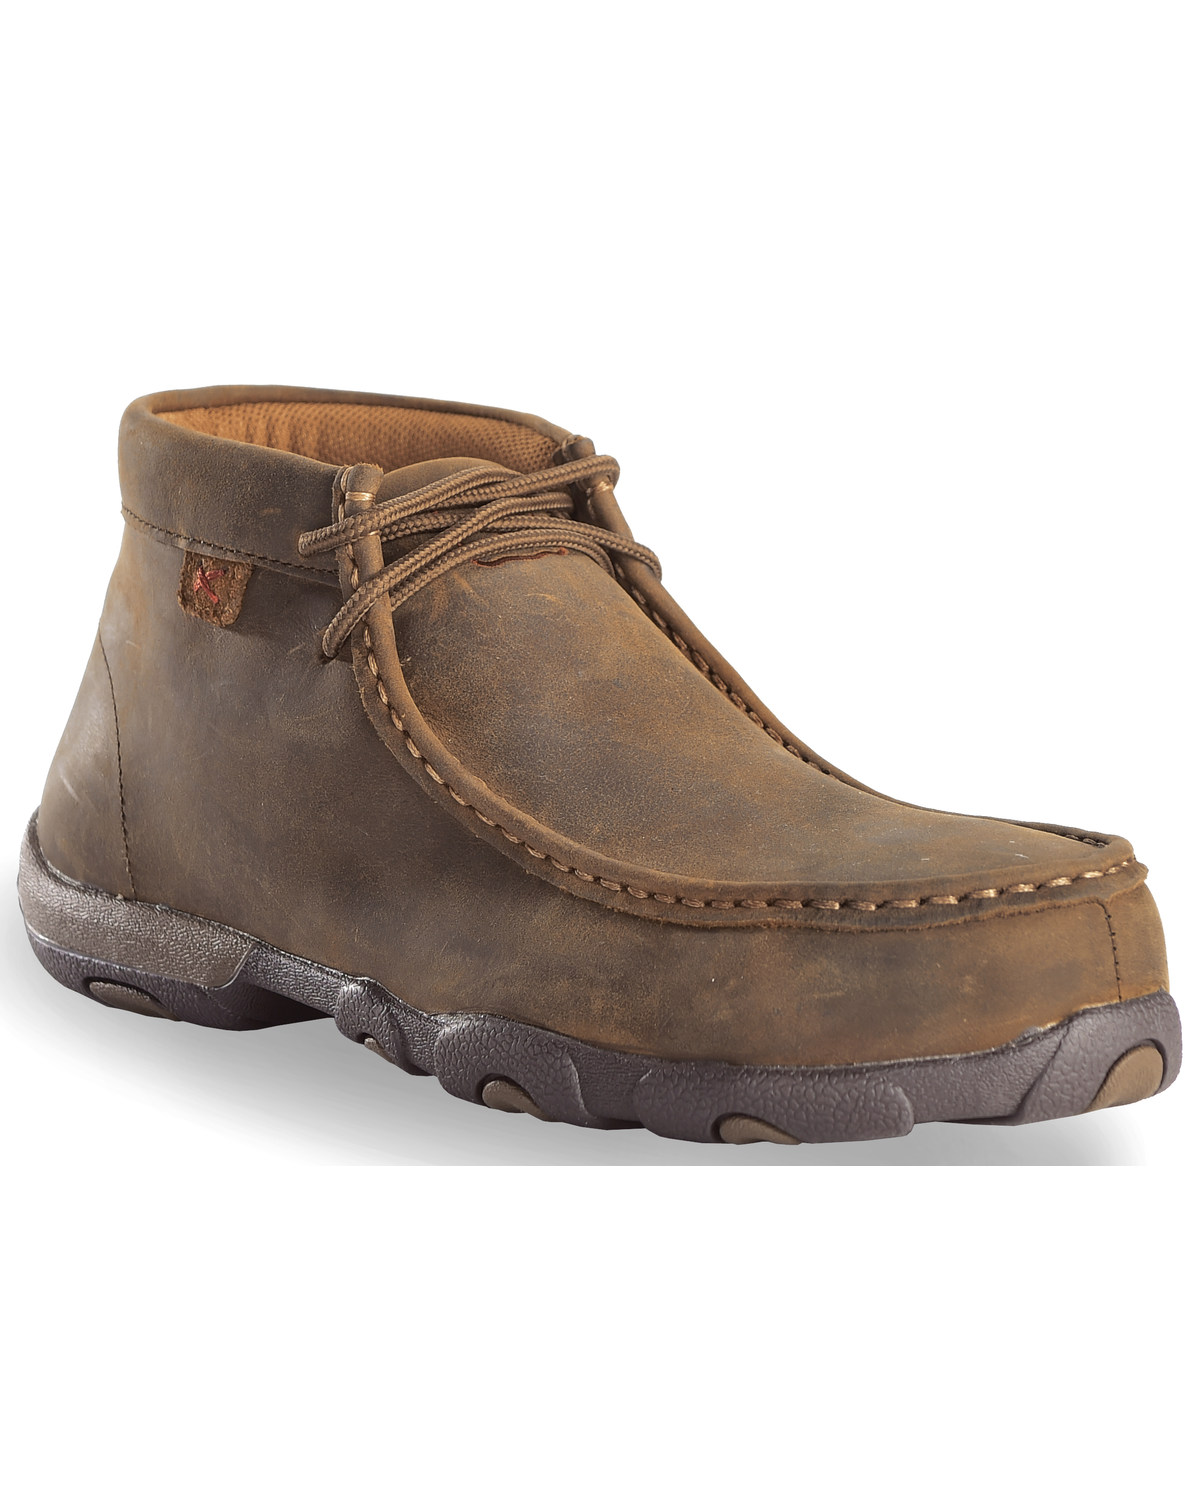 Twisted X Women's Driving Moc Work Shoes - Steel Toe